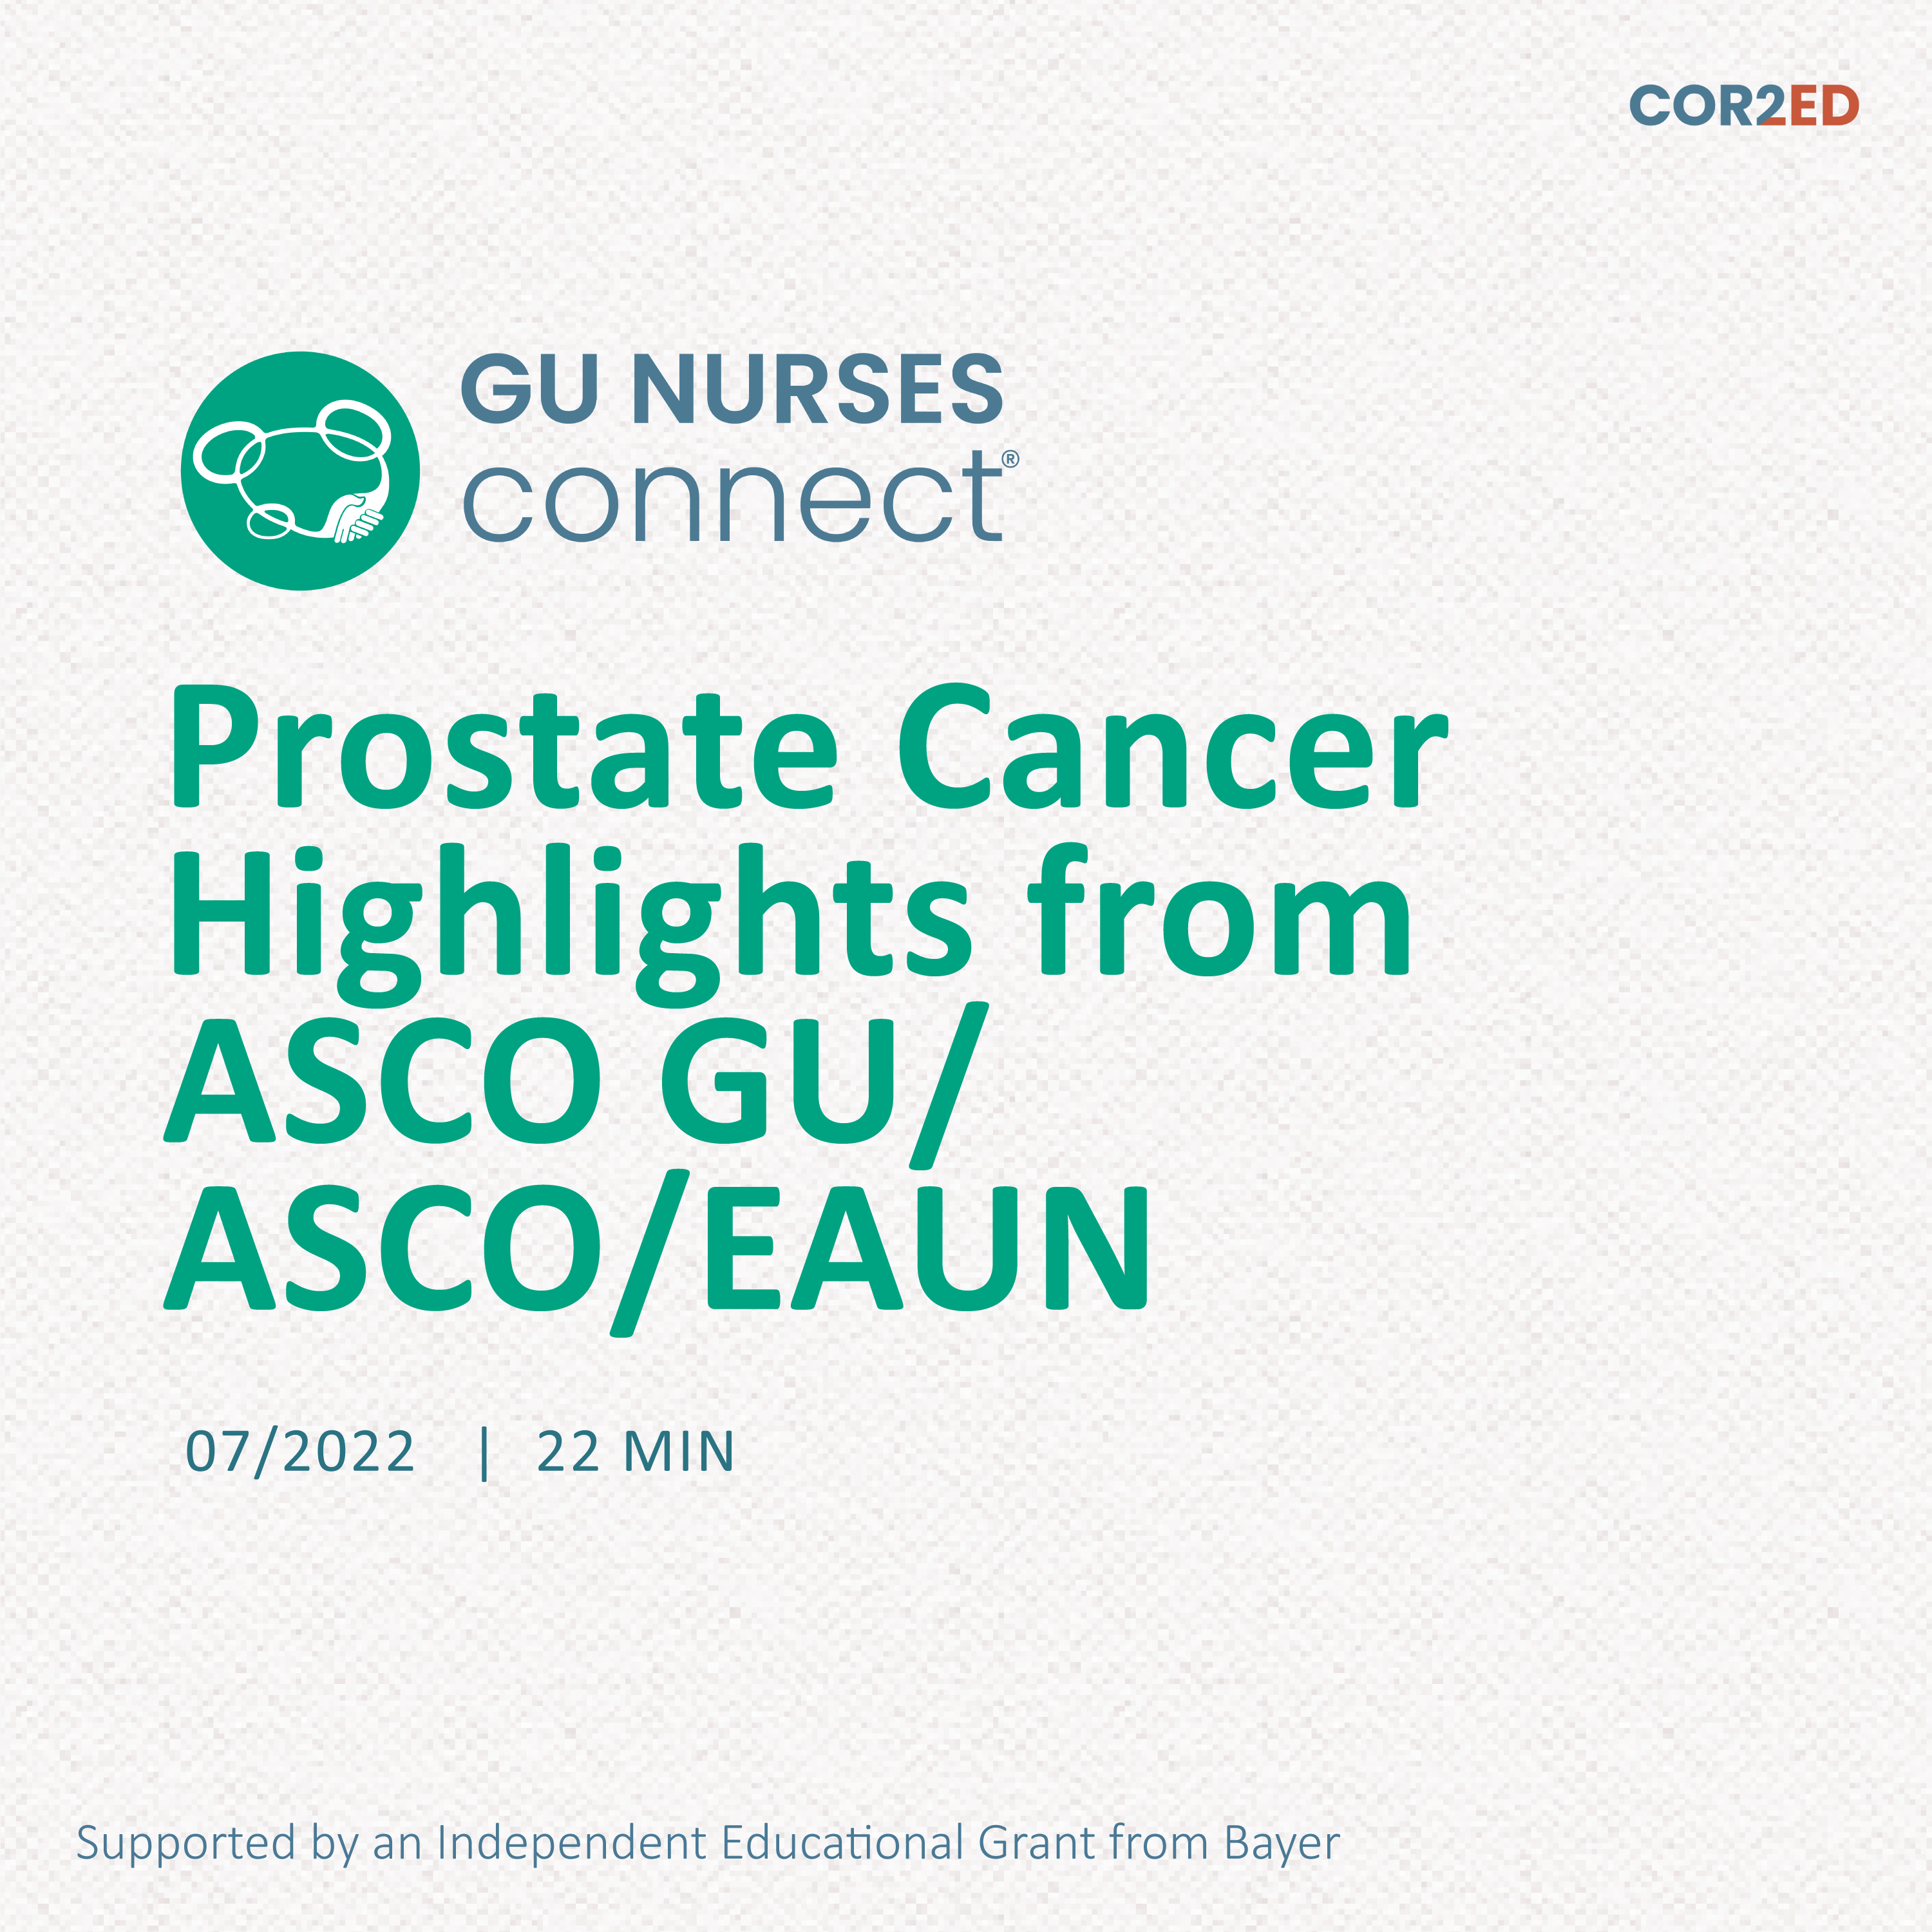 Prostate Cancer Highlights from ASCO GU, ASCO and EAUN 2022